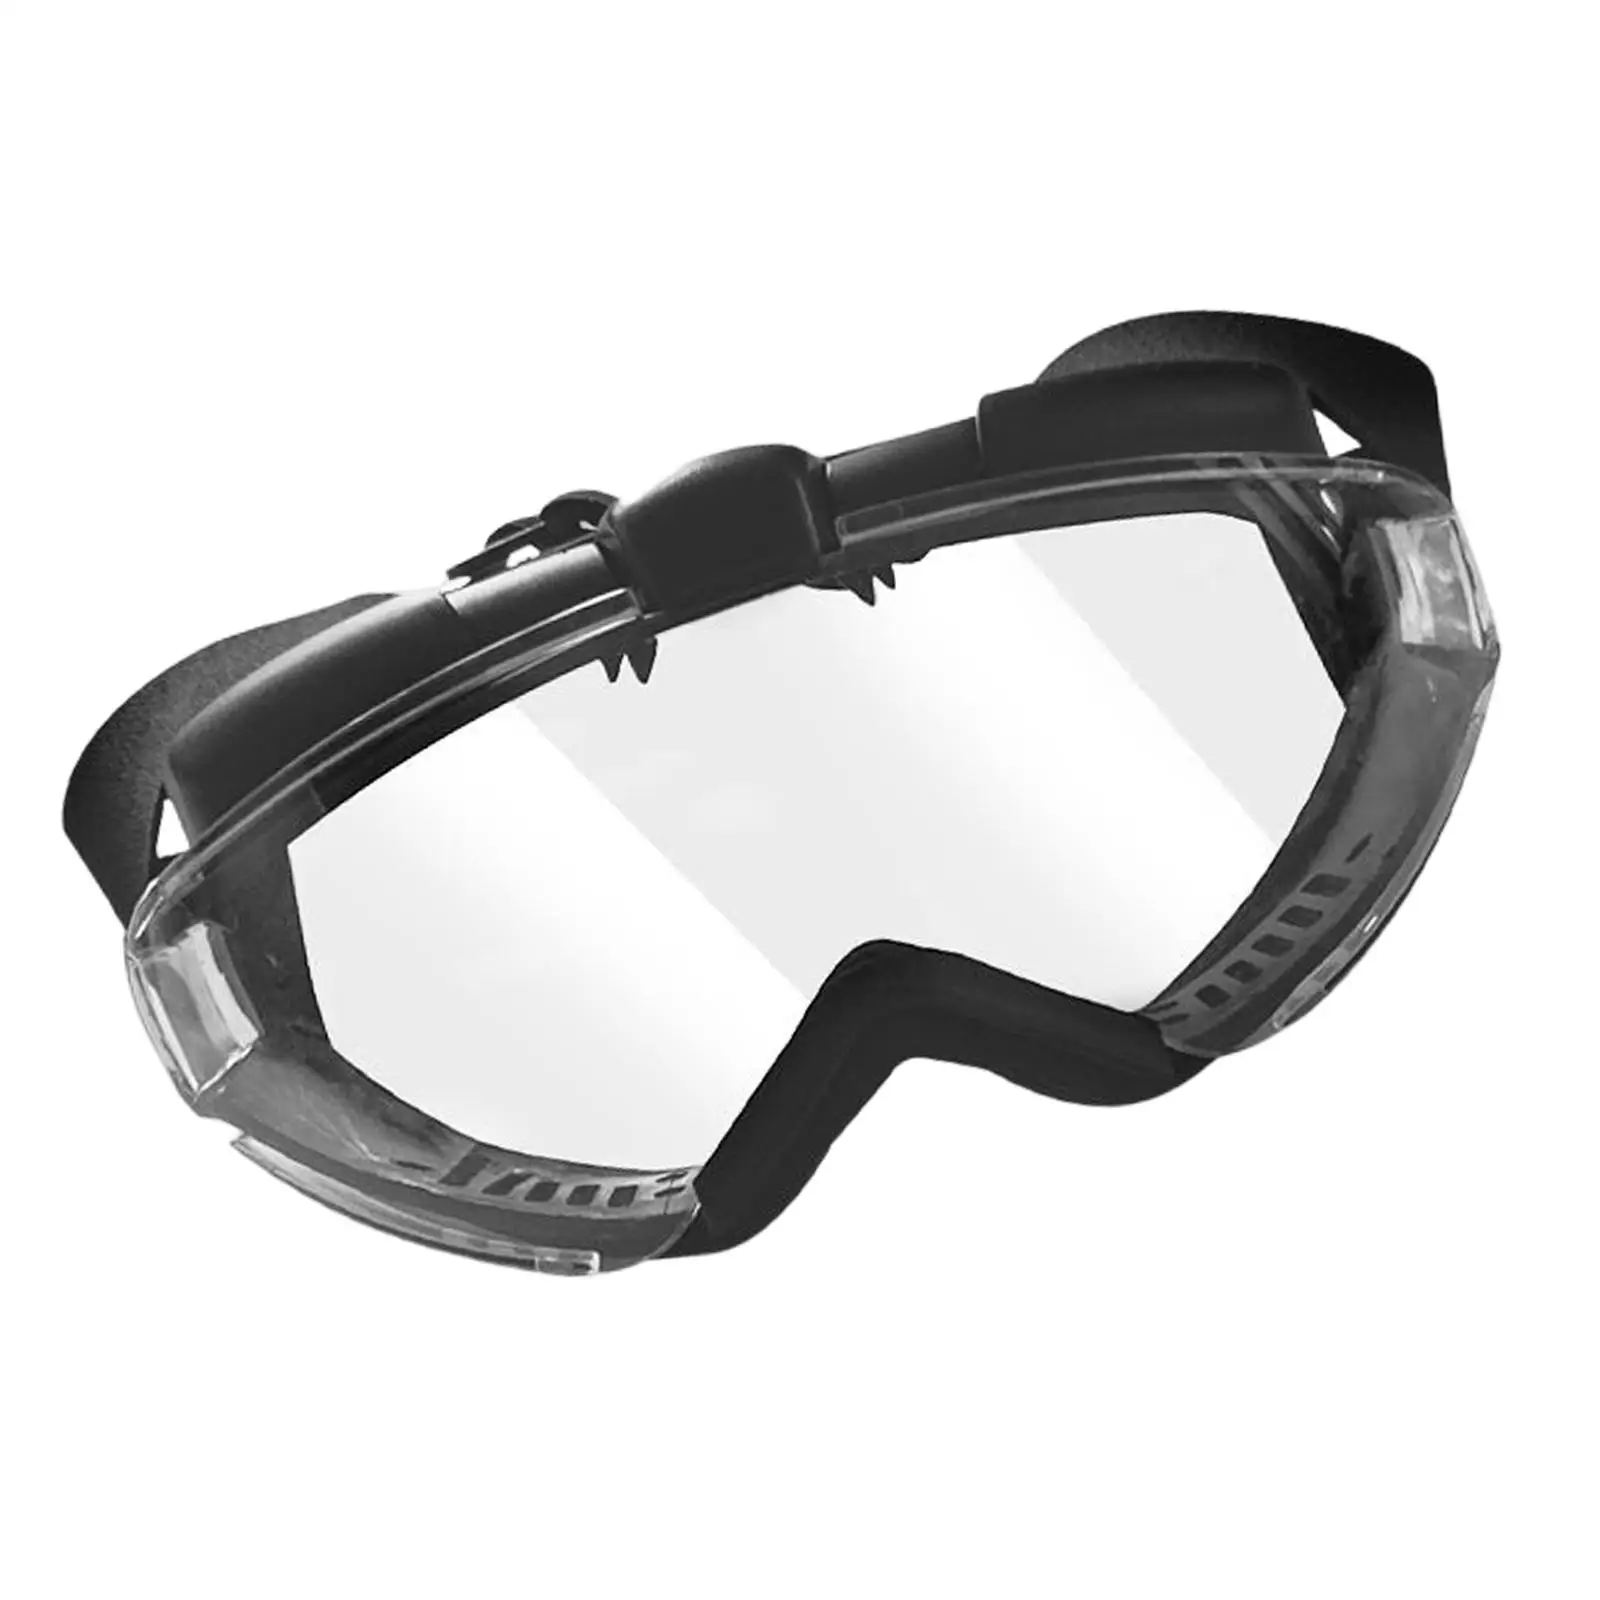 Outdoor Glasses Eye Protection Men Women Adjustable Strap for Snowmobiles